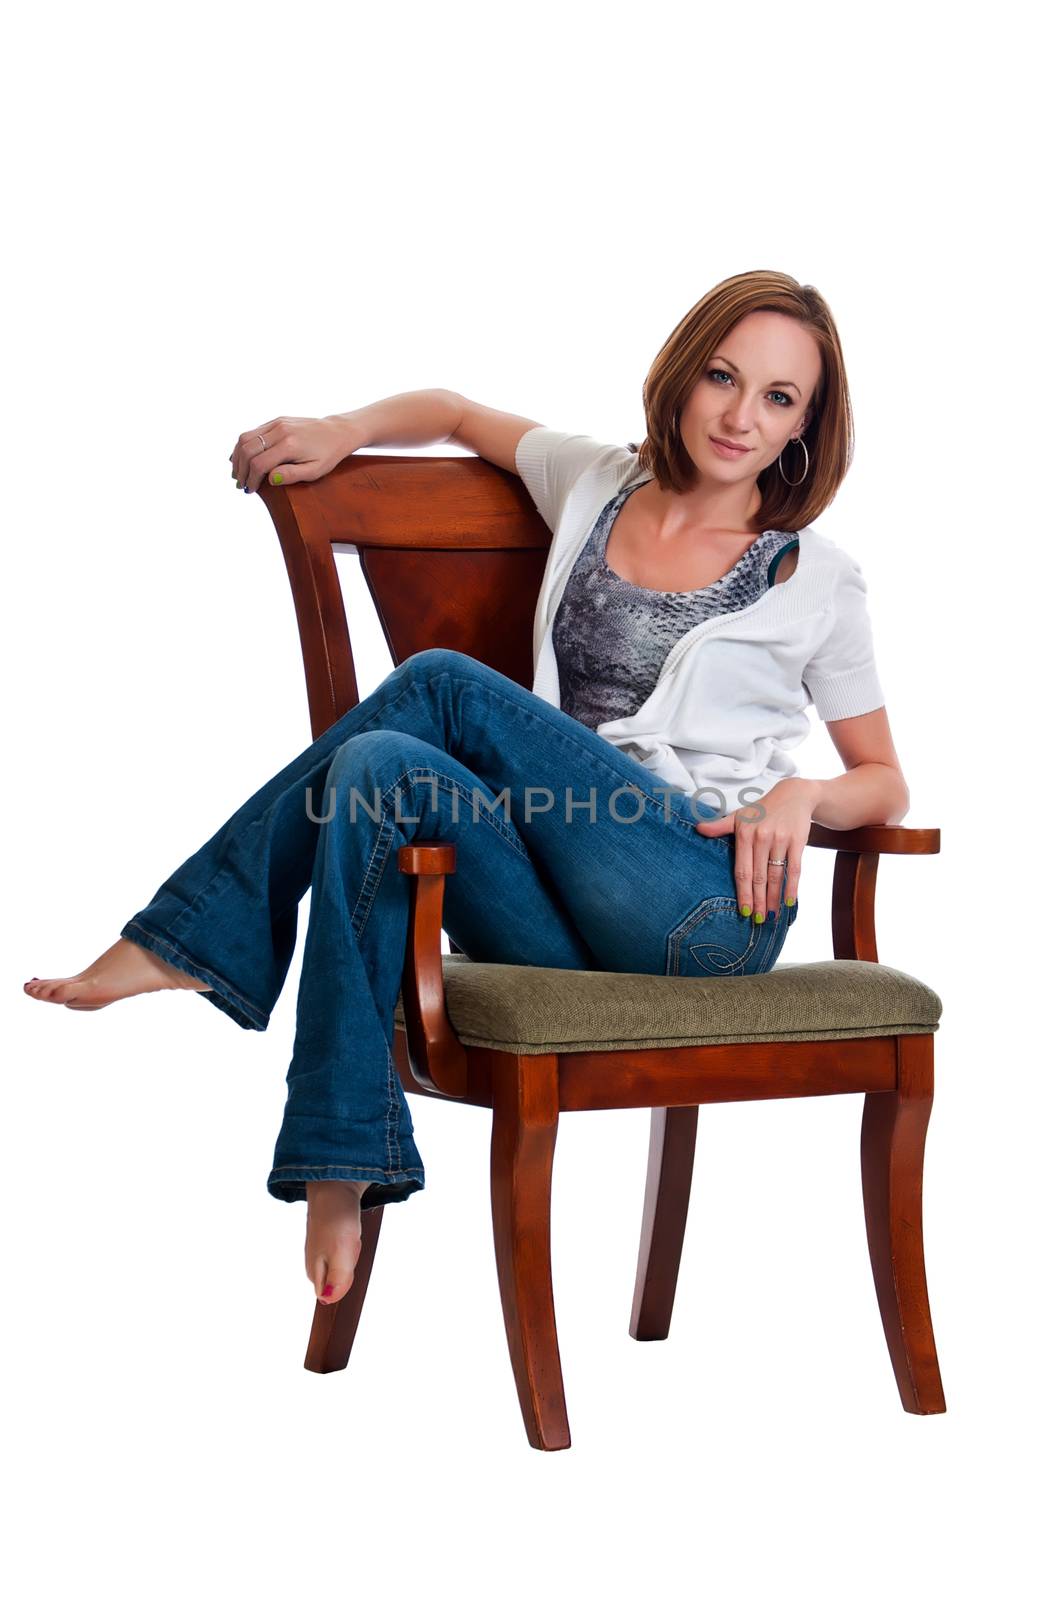 Pretty young woman resting with her legs up in an arm chair.